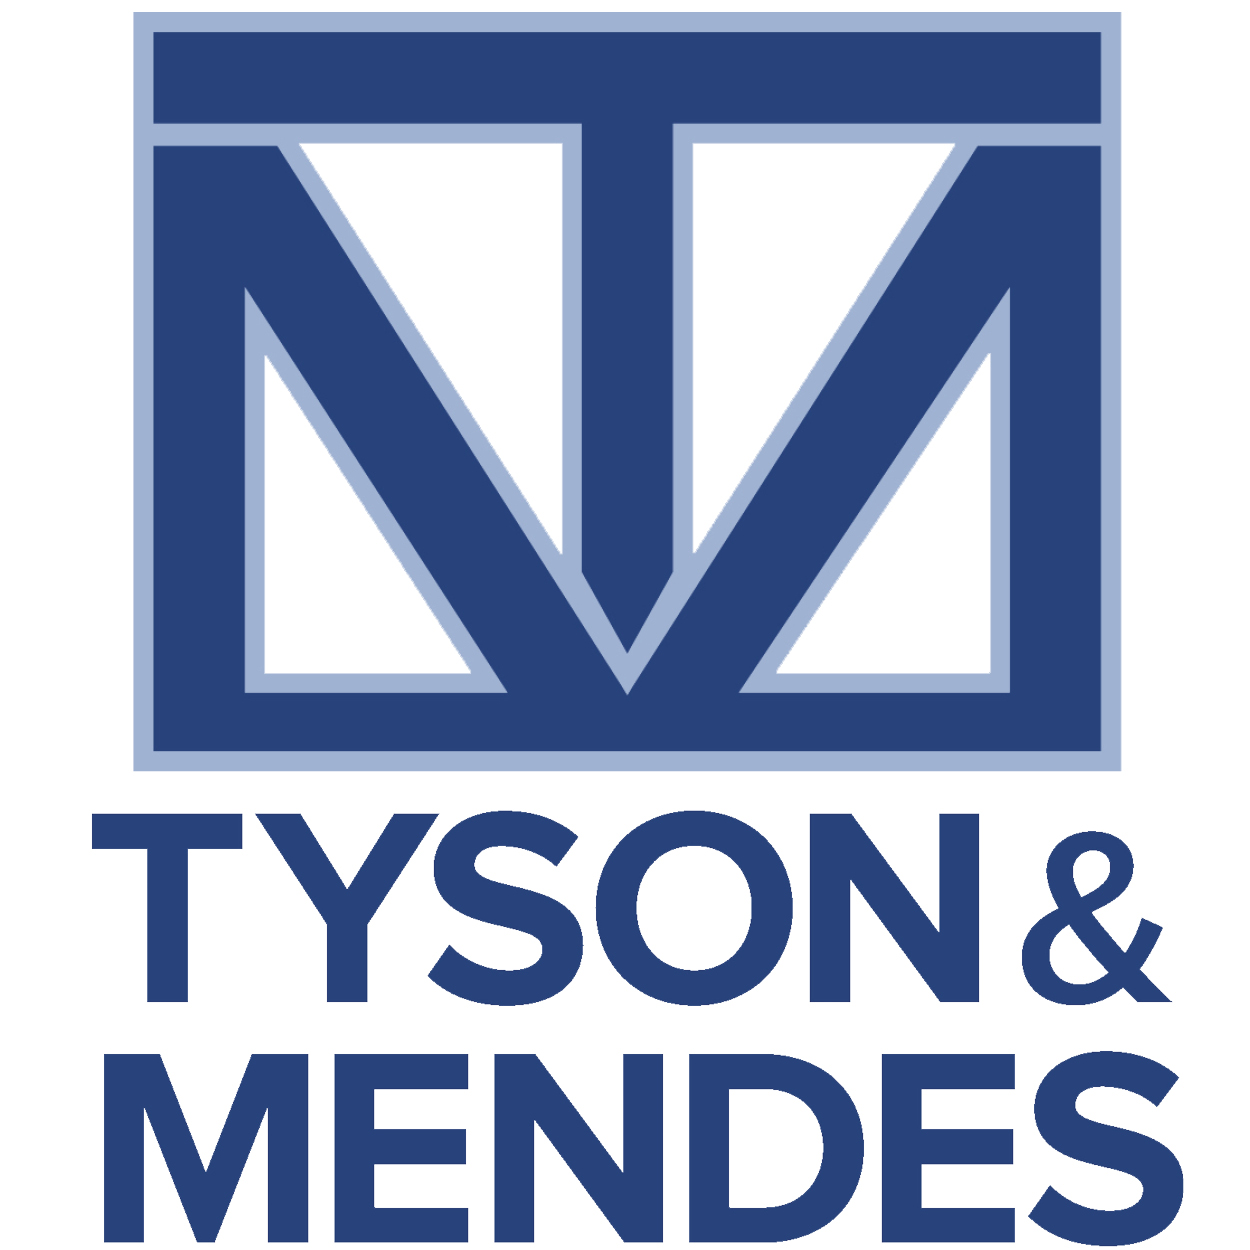 Tyson & Mendes Launches Chicago Office; Names Managing Partner and Senior Counsel of Newest Branch: Expanding Insurance Defense Firm Adds Seasoned Litigators Scott Ruksakiati and Mark Shanberg